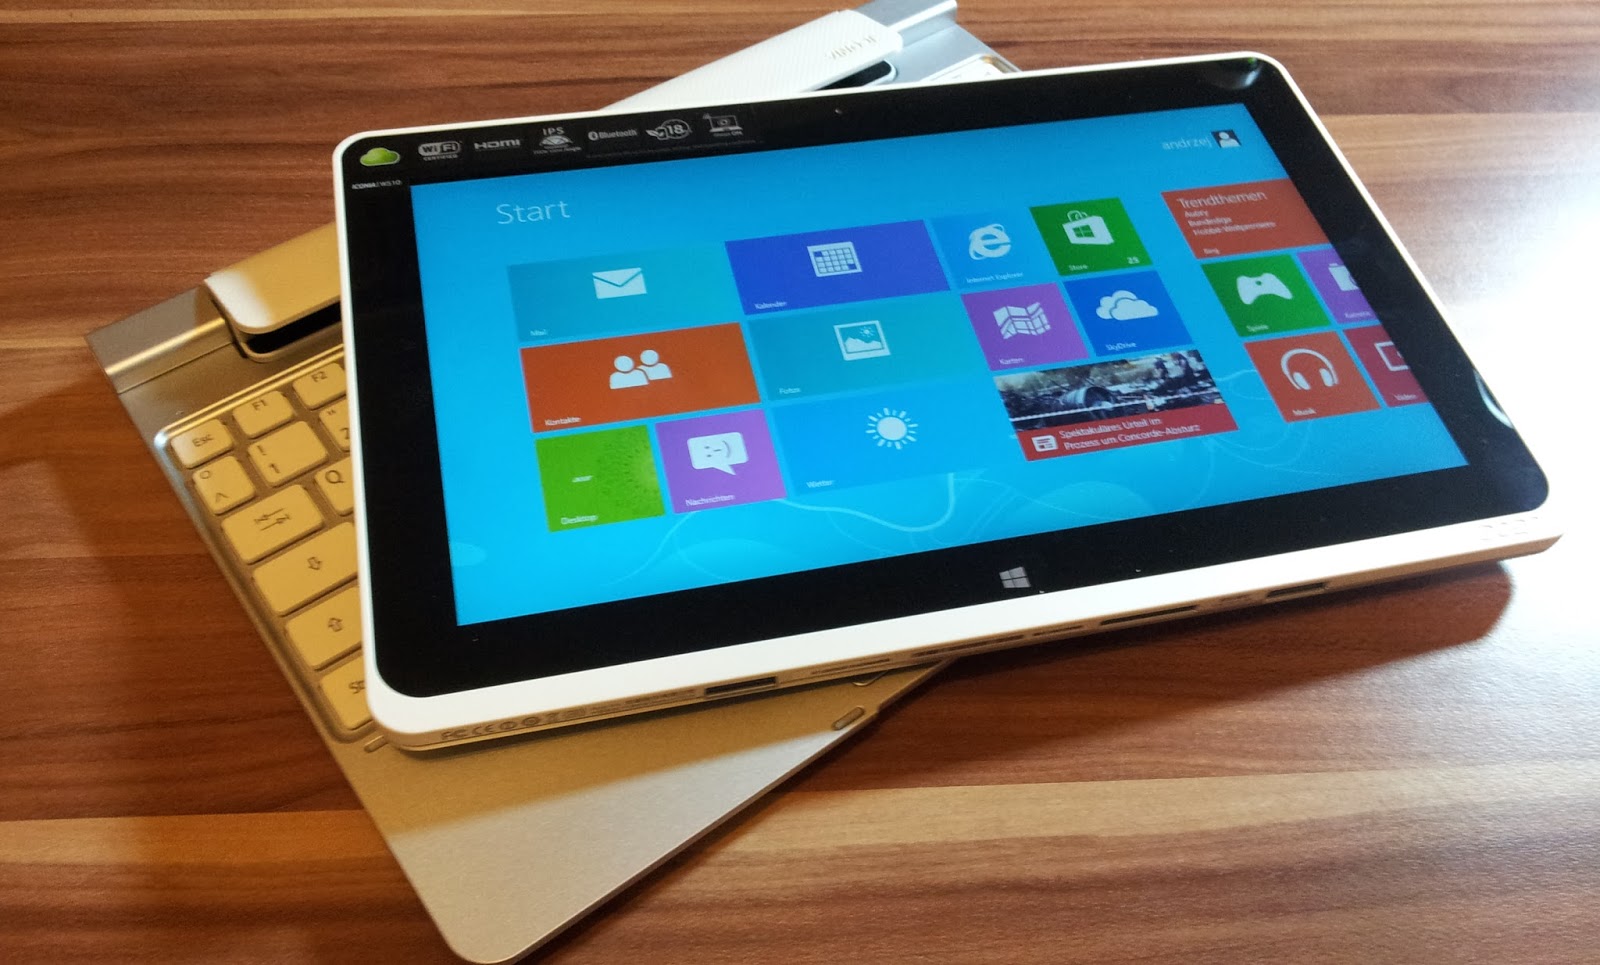 Acer Iconia tablets: a budget choice for Israeli consumers